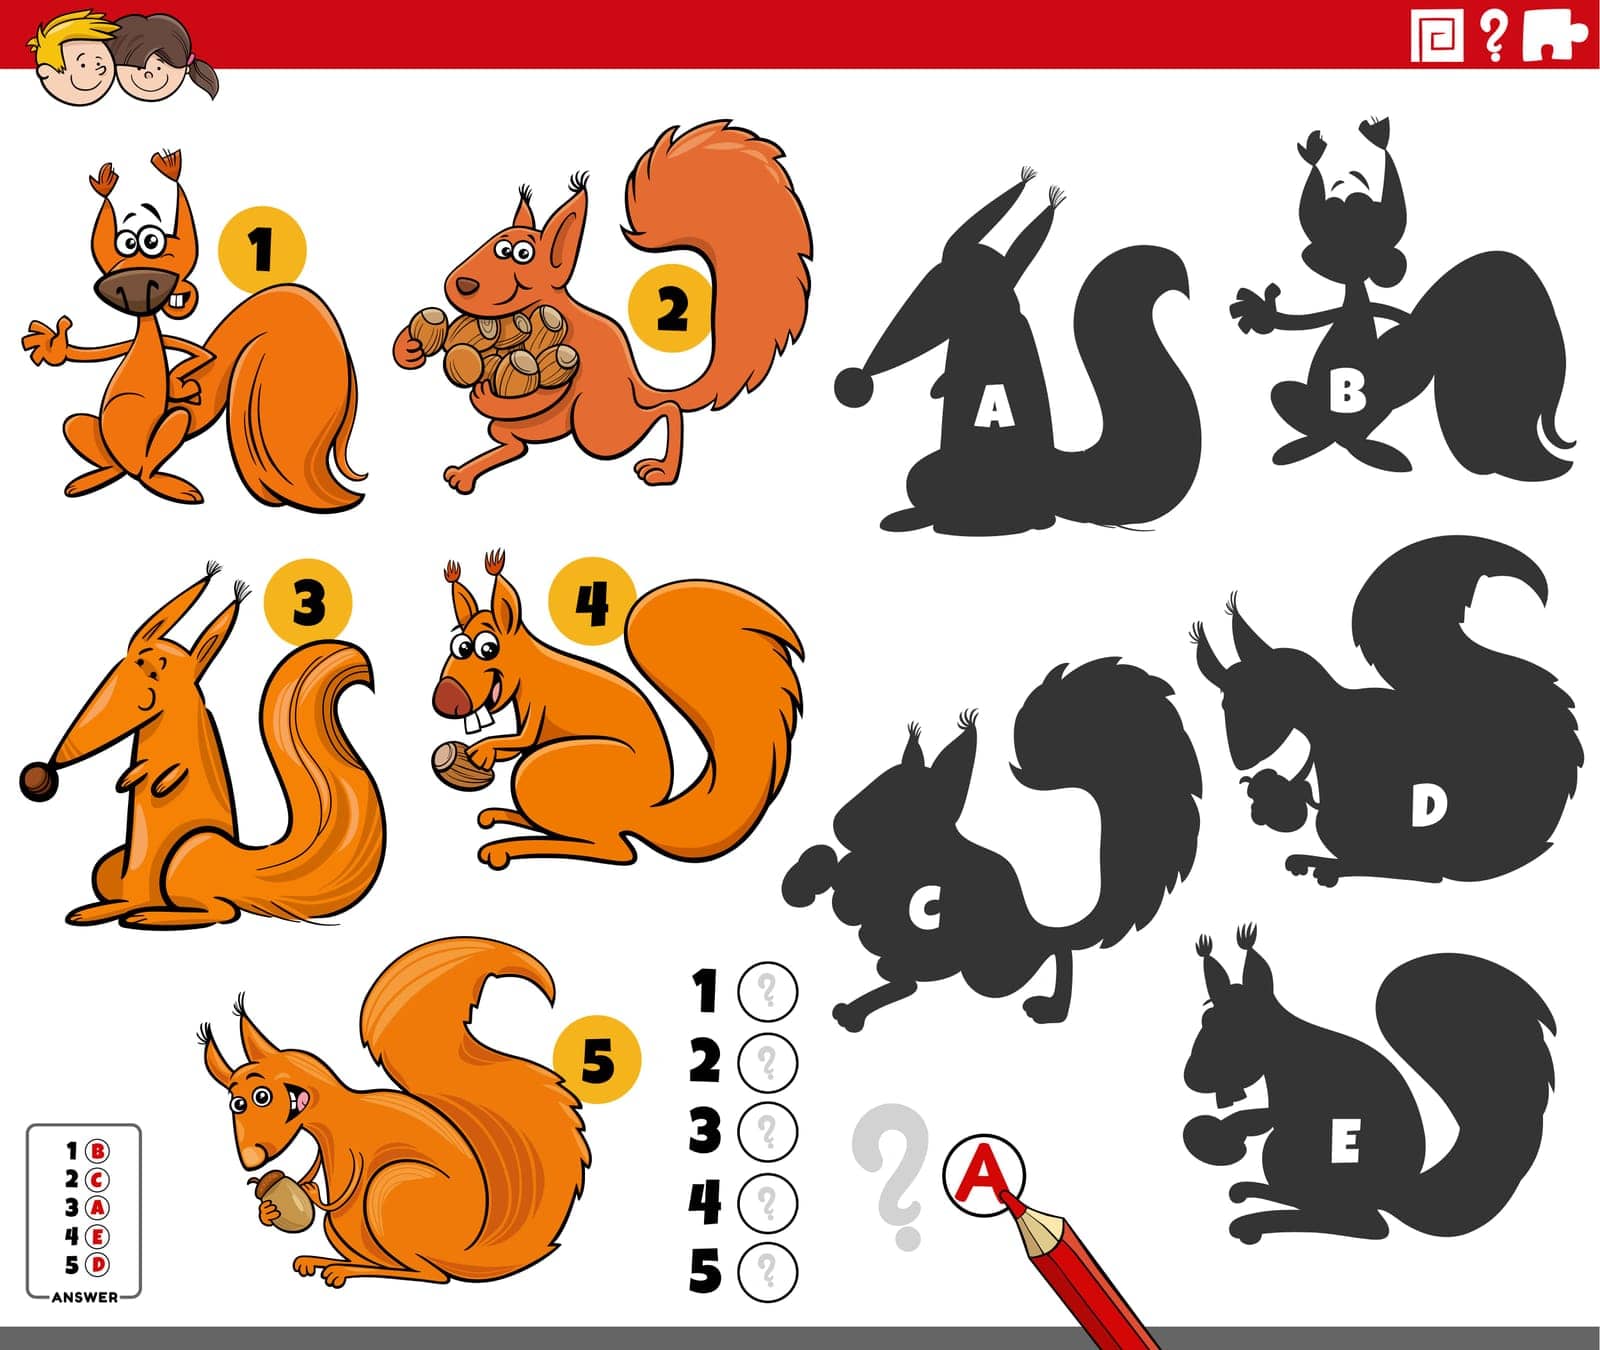 finding shadows game with cartoon squirrels characters by izakowski